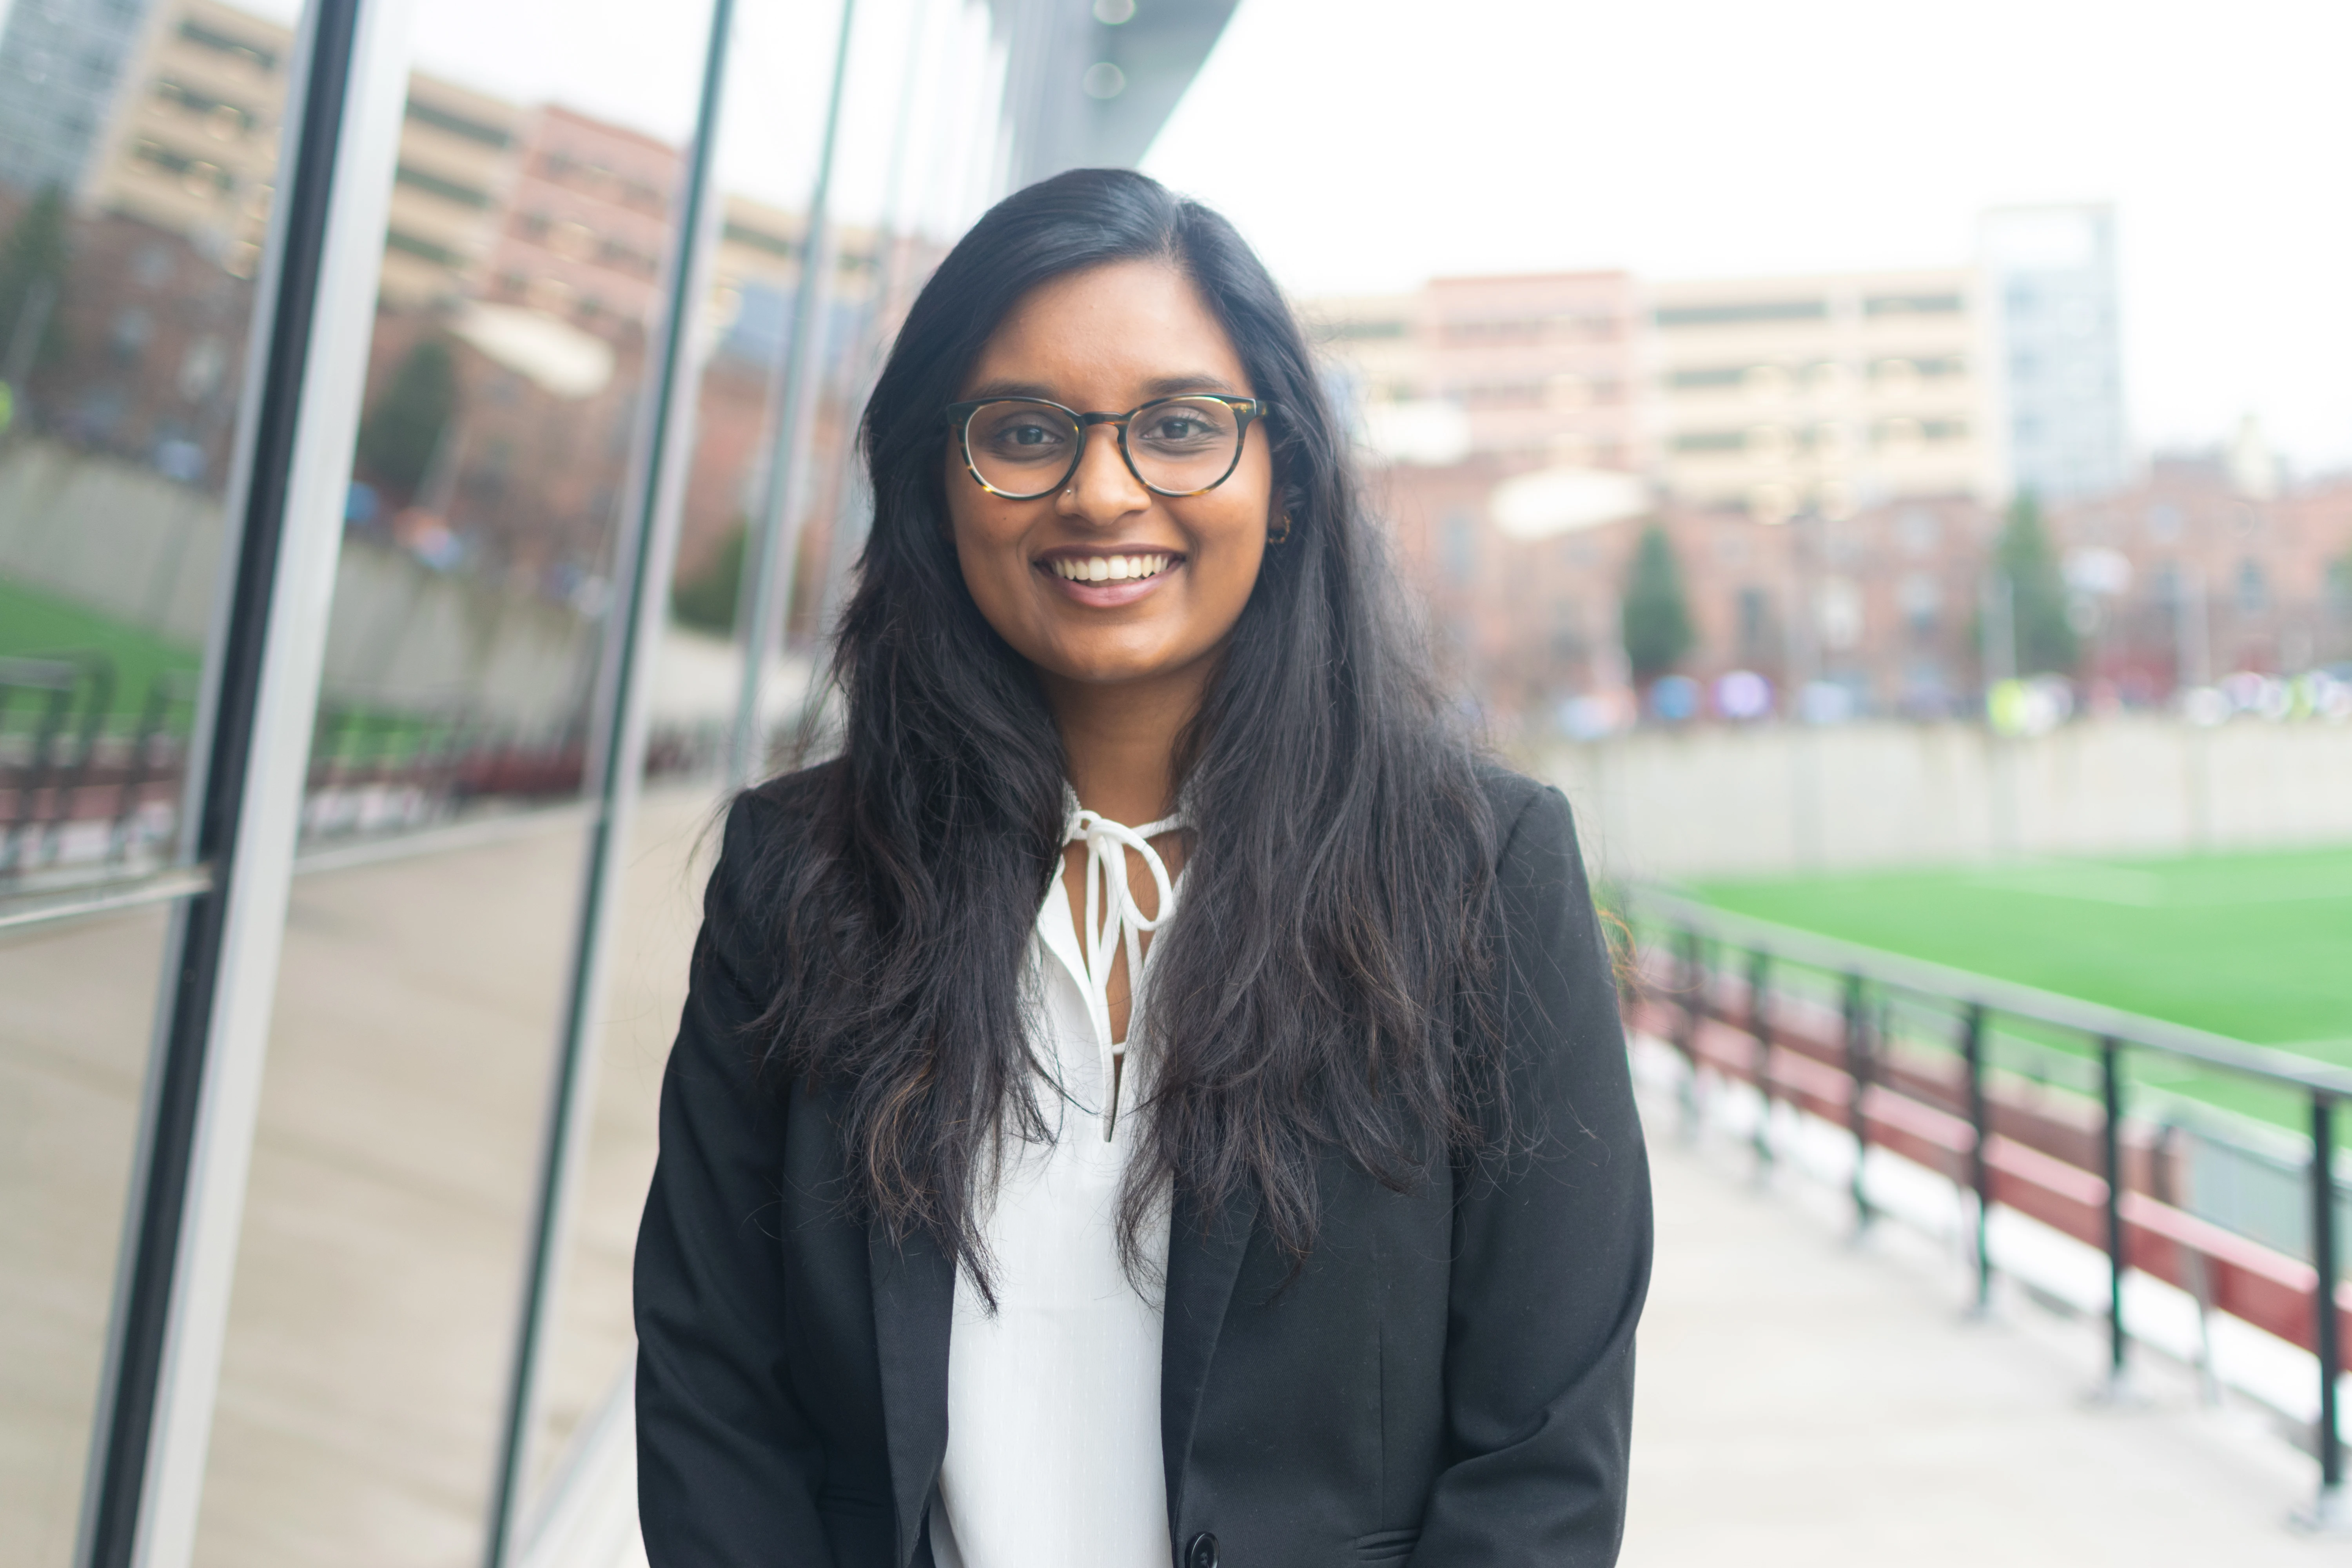 Anuja Badeti of NJIT was a summer intern for Bloomberg's Core Analytics & Insights Engineering team.